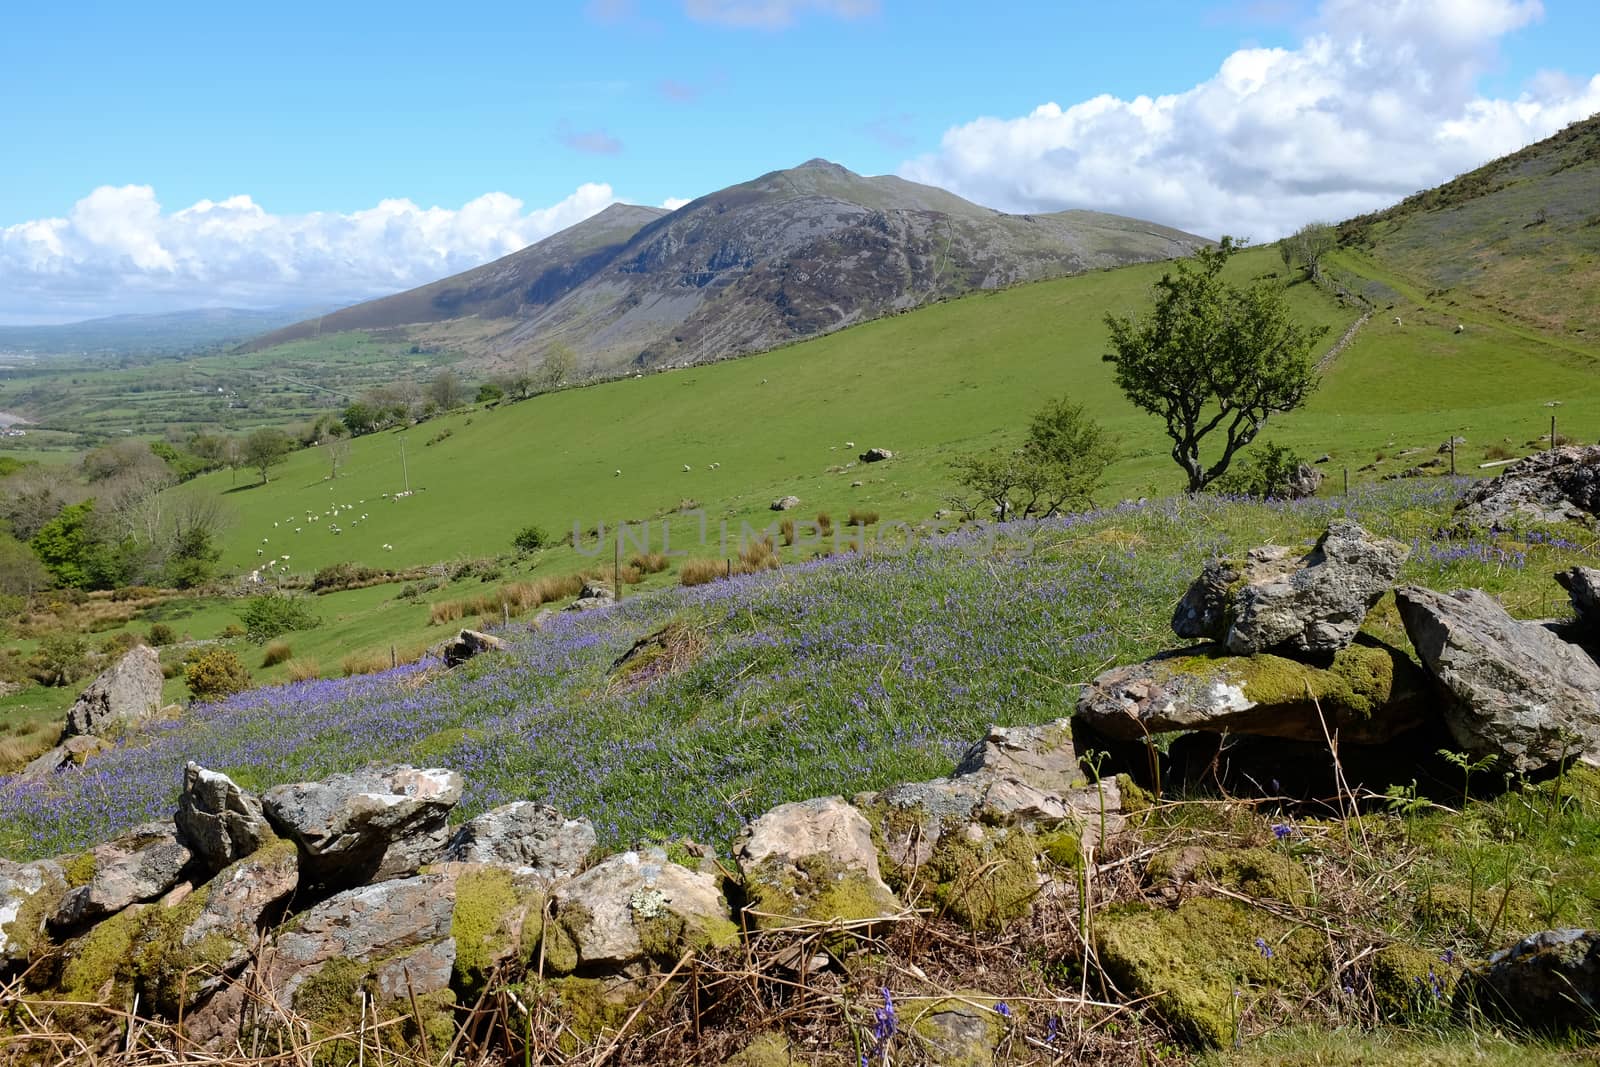 A stone wall and bluebells lead to grazing land with the mountain Gyrn Ddu against a blue sky in the distance. Lleyn peninsular, Wales, UK.